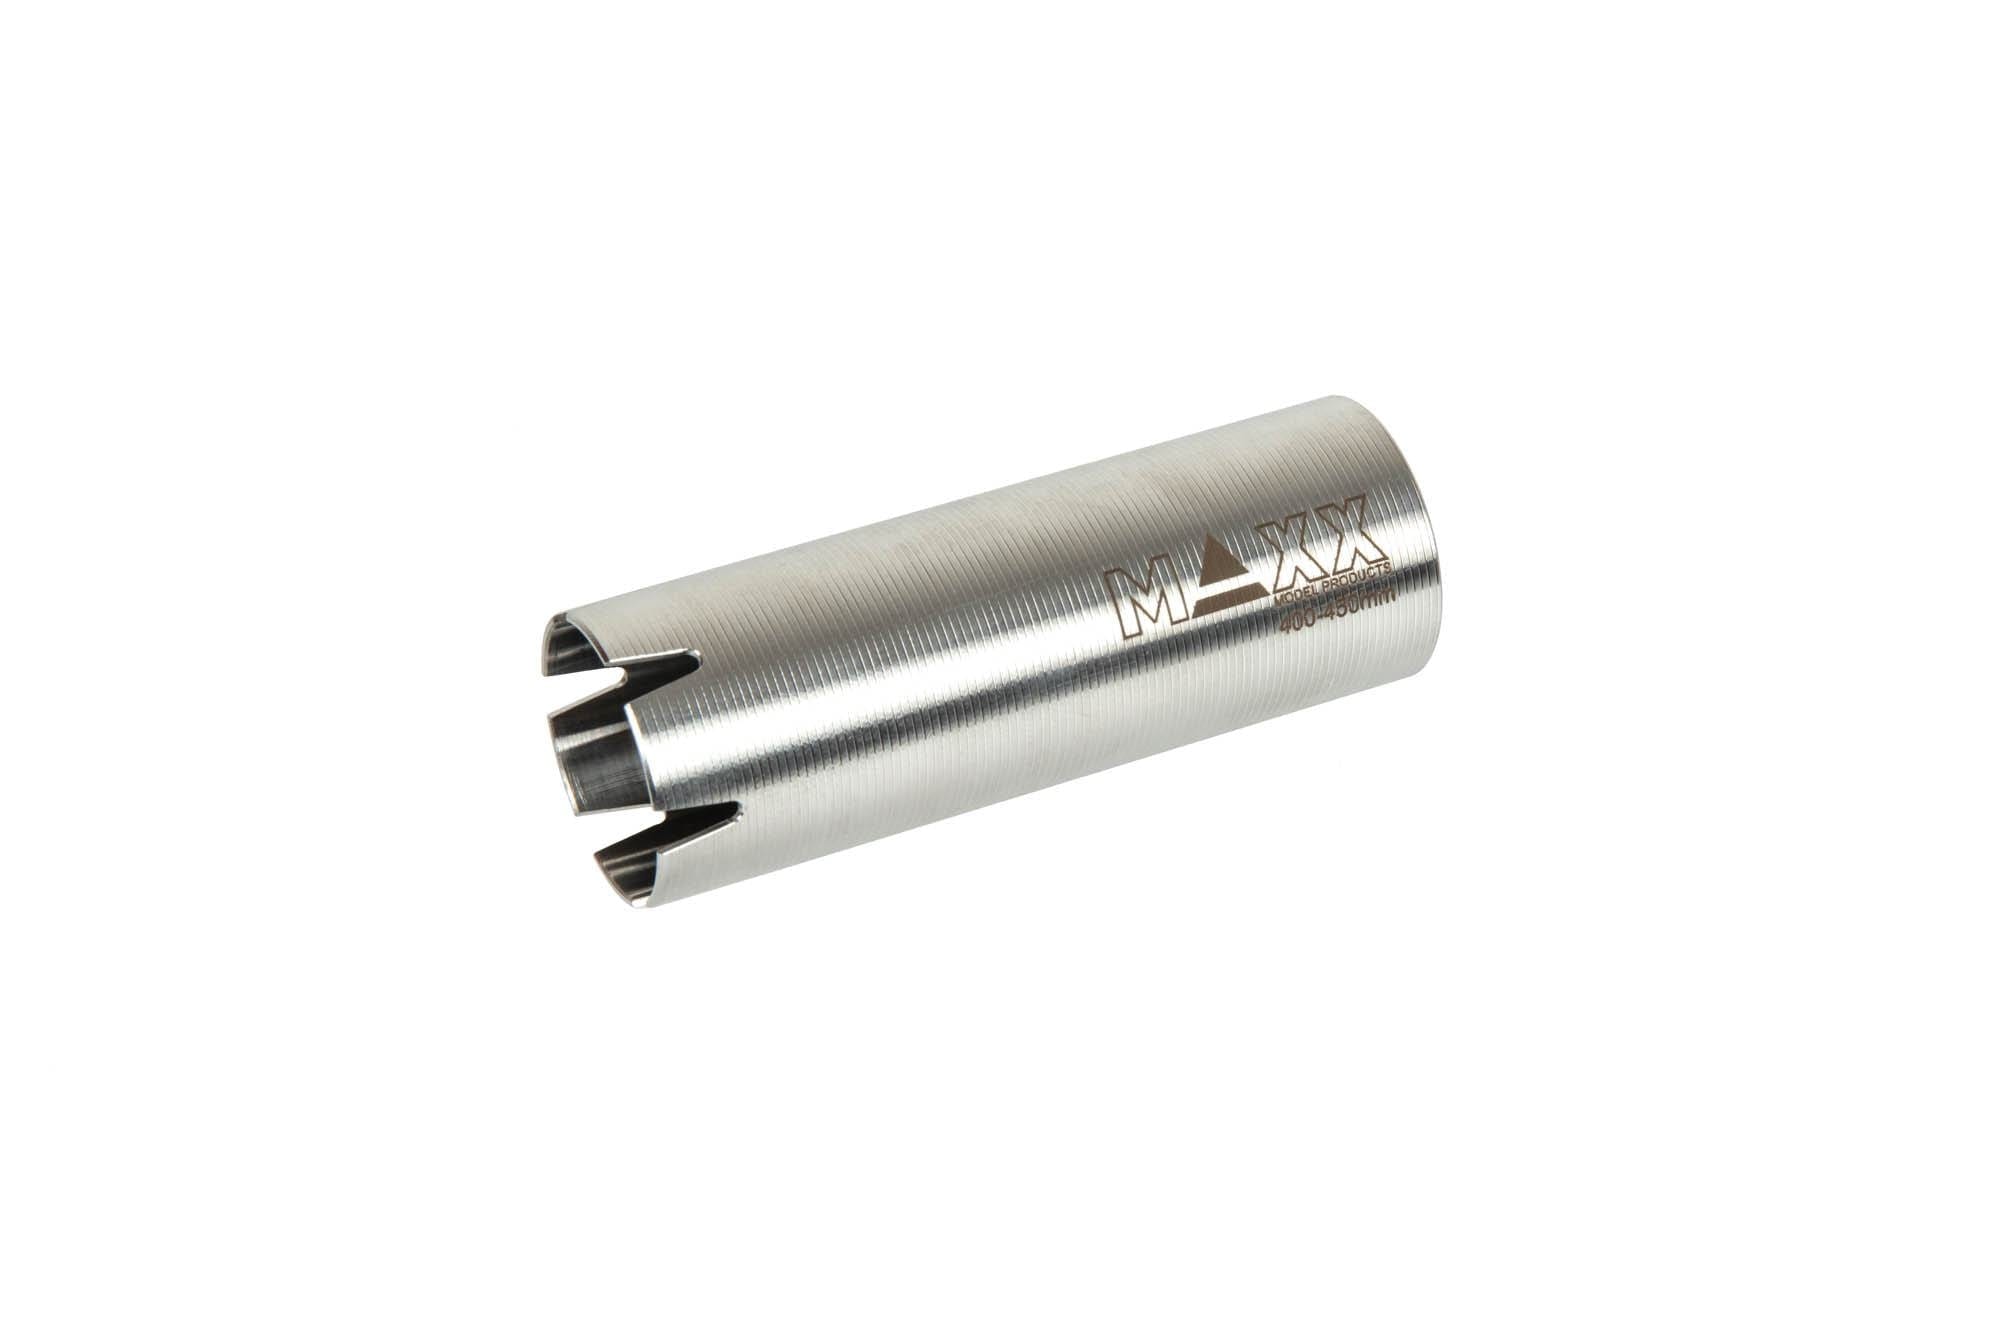 Hardened Stainless Steel Cylinder - Type B (400 - 450mm)